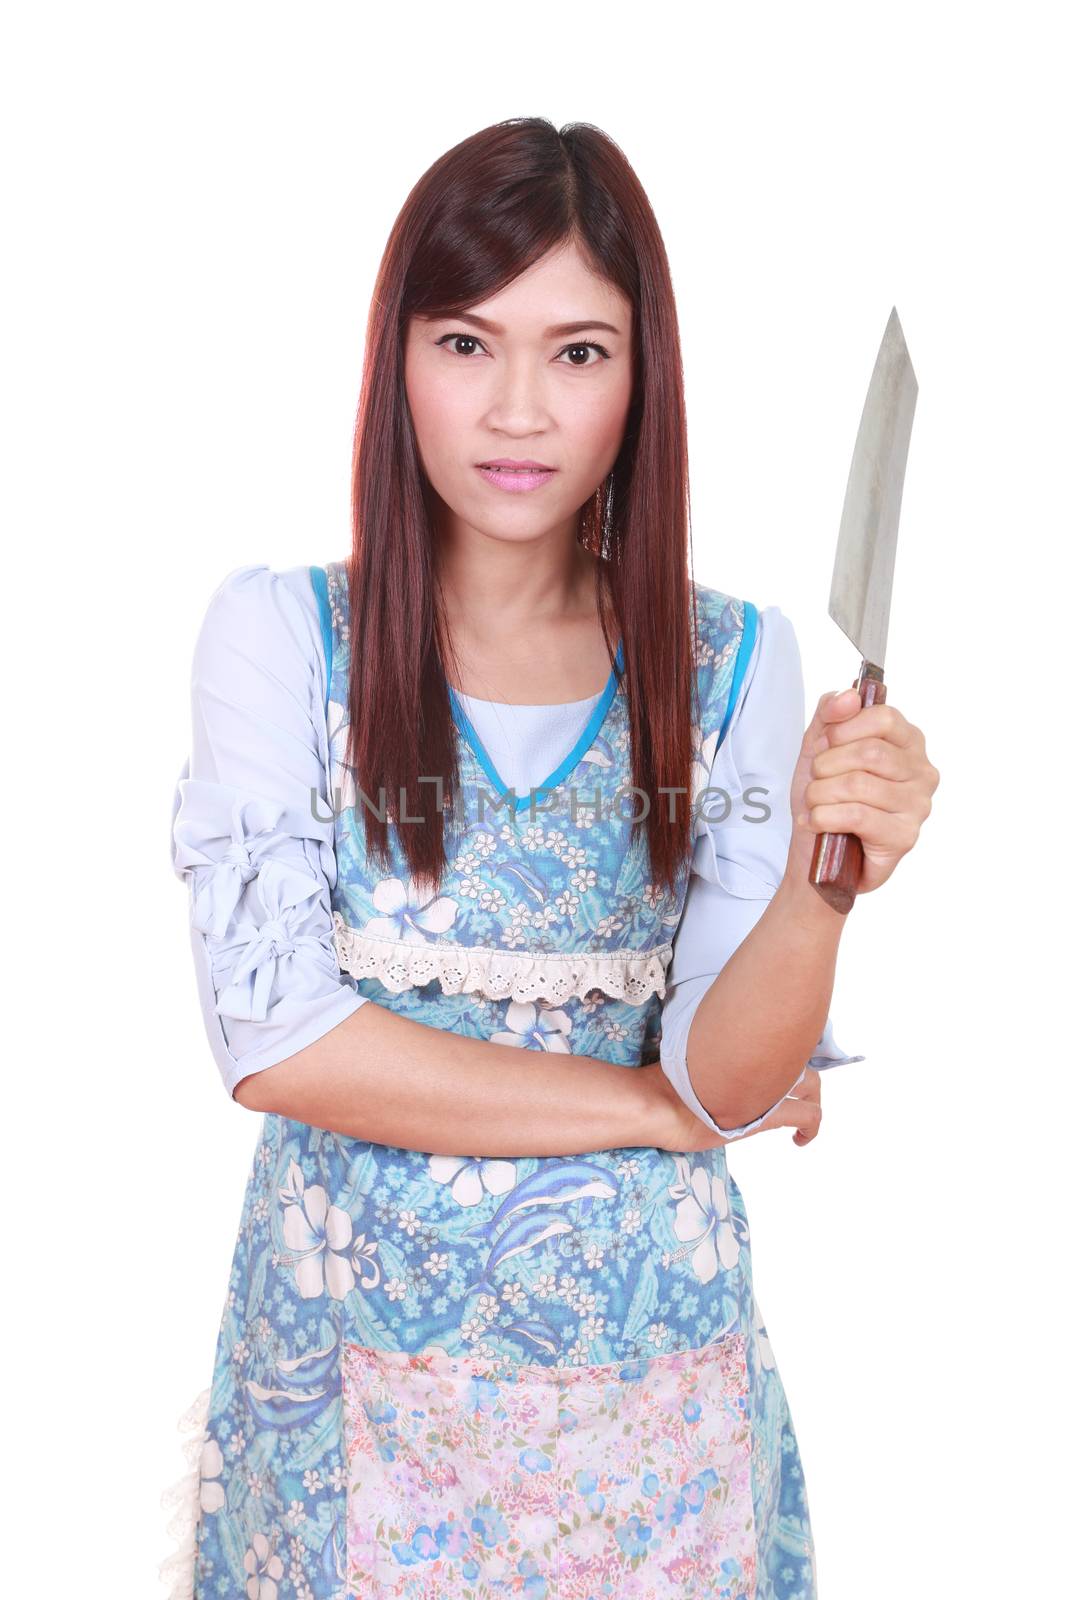 female chef holding a carving knife by geargodz